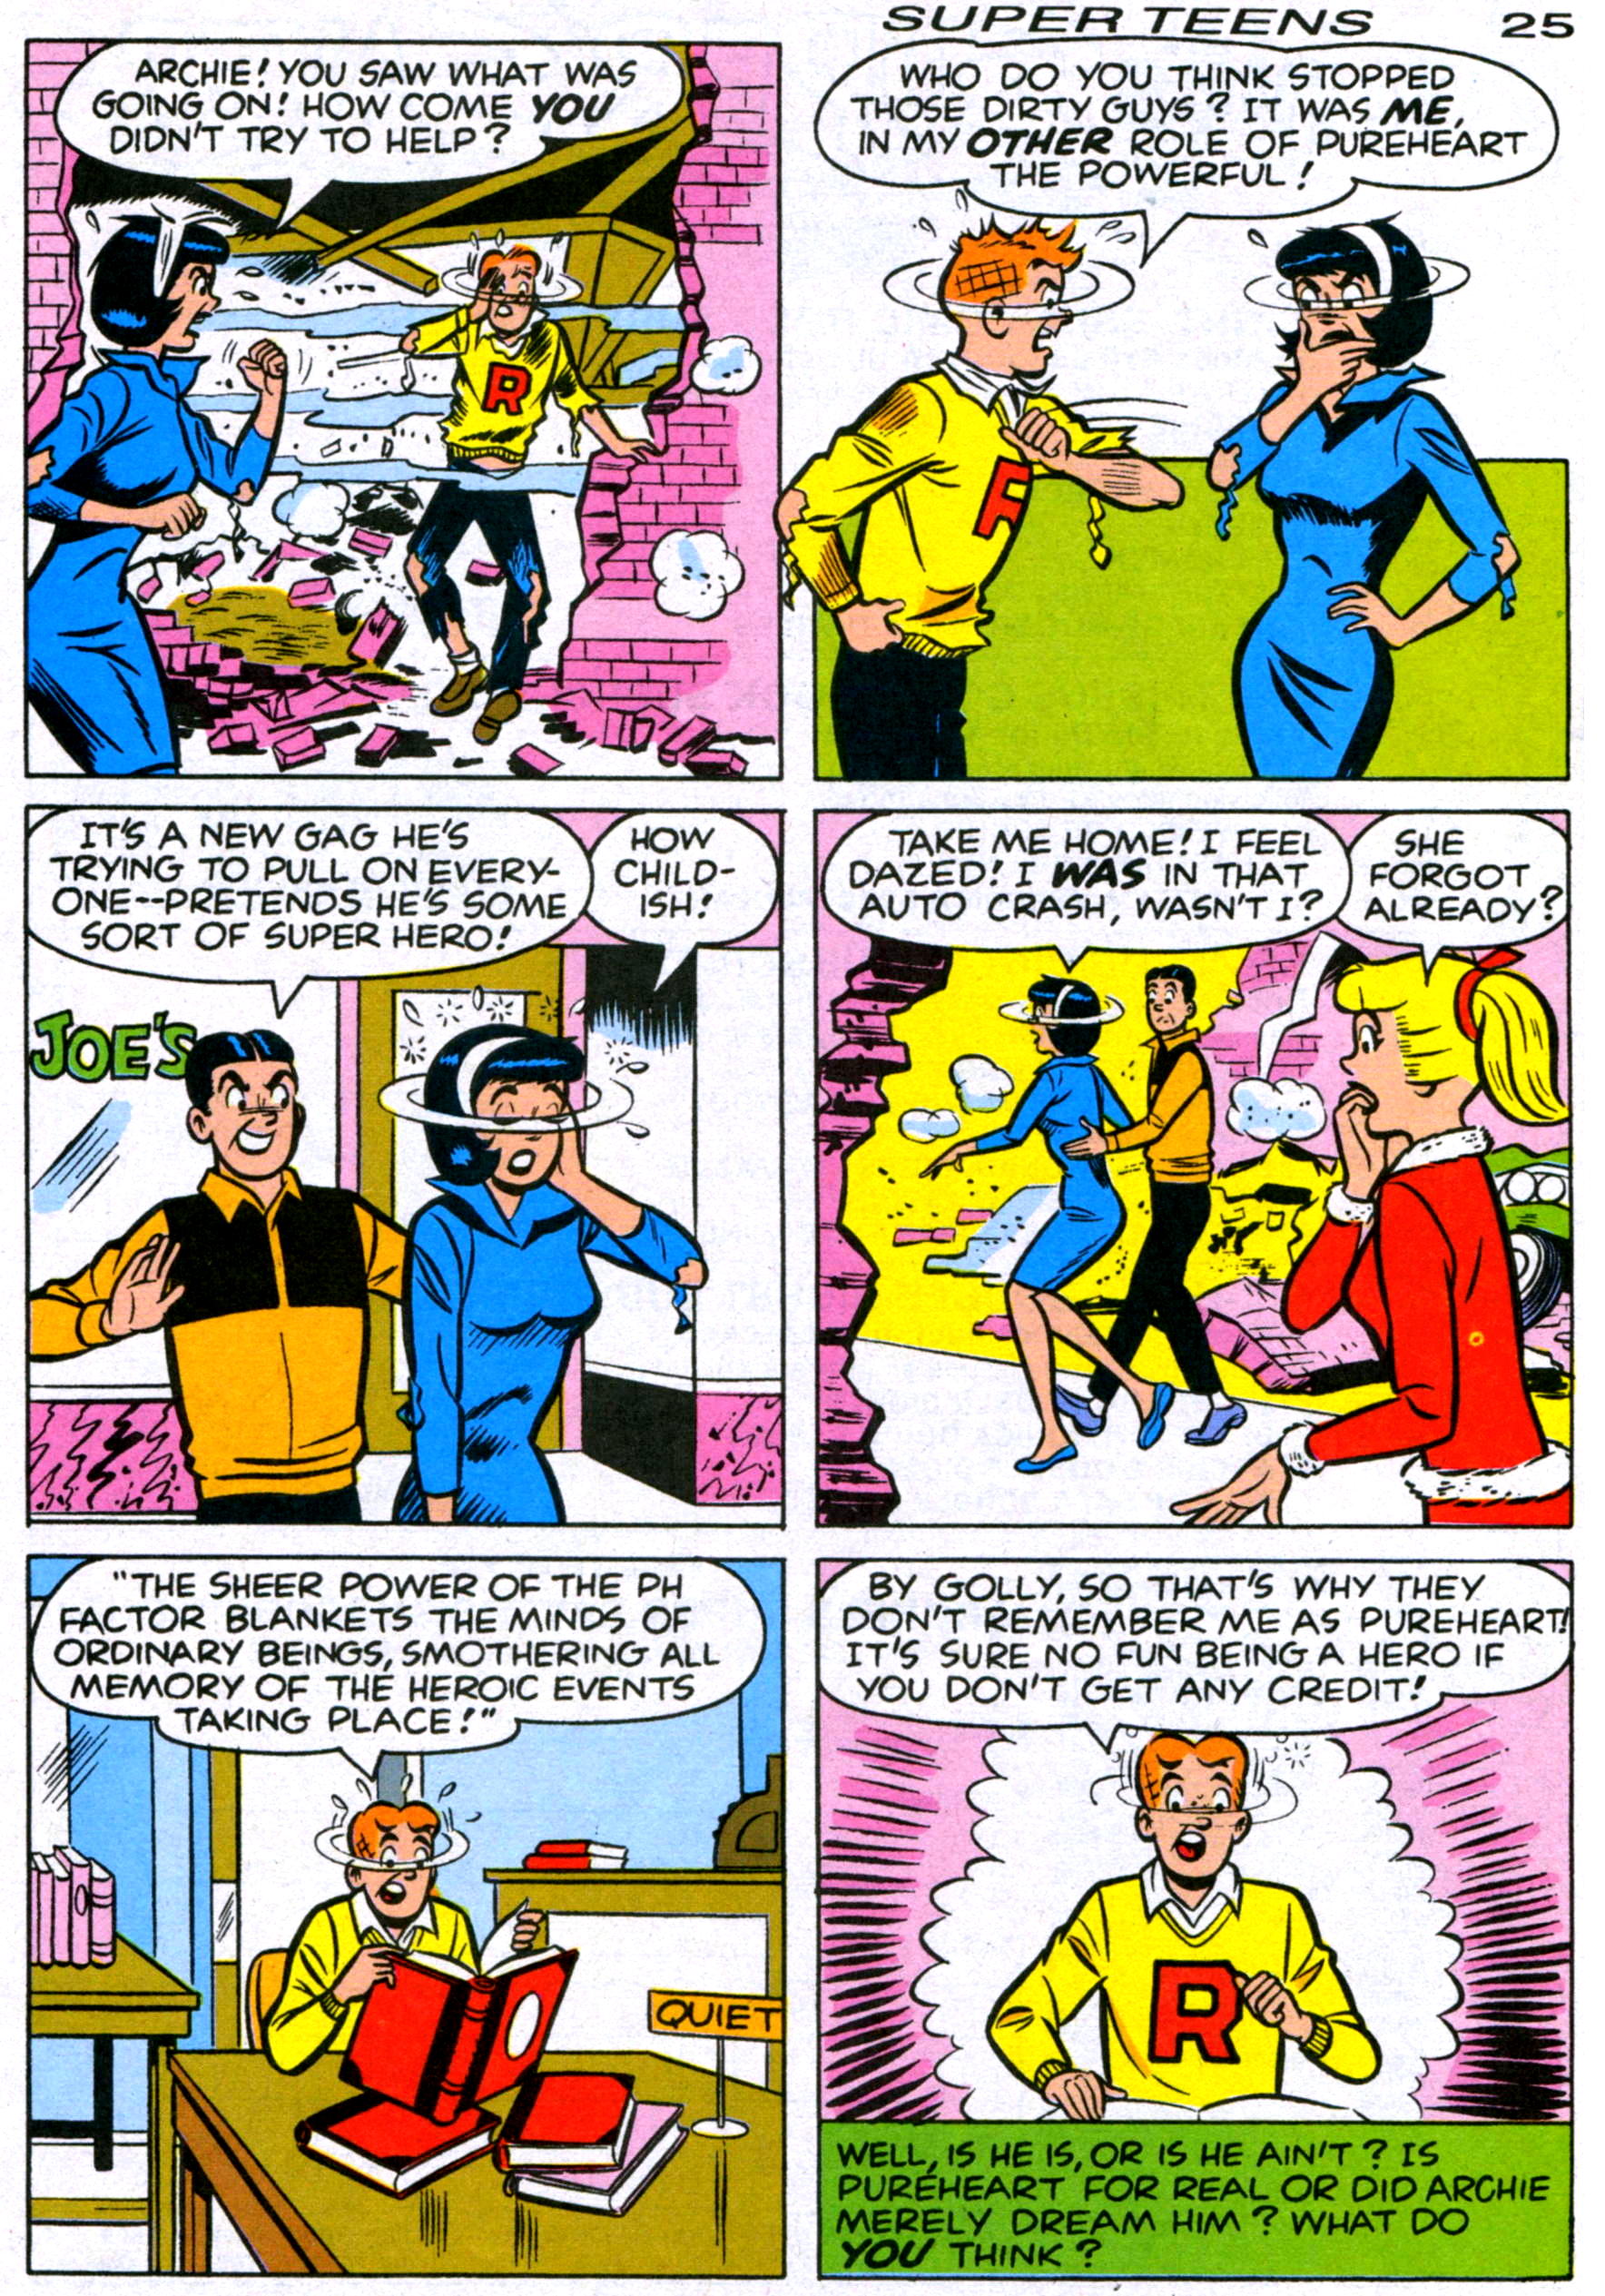 Read online Archie's Super Teens comic -  Issue #1 - 27